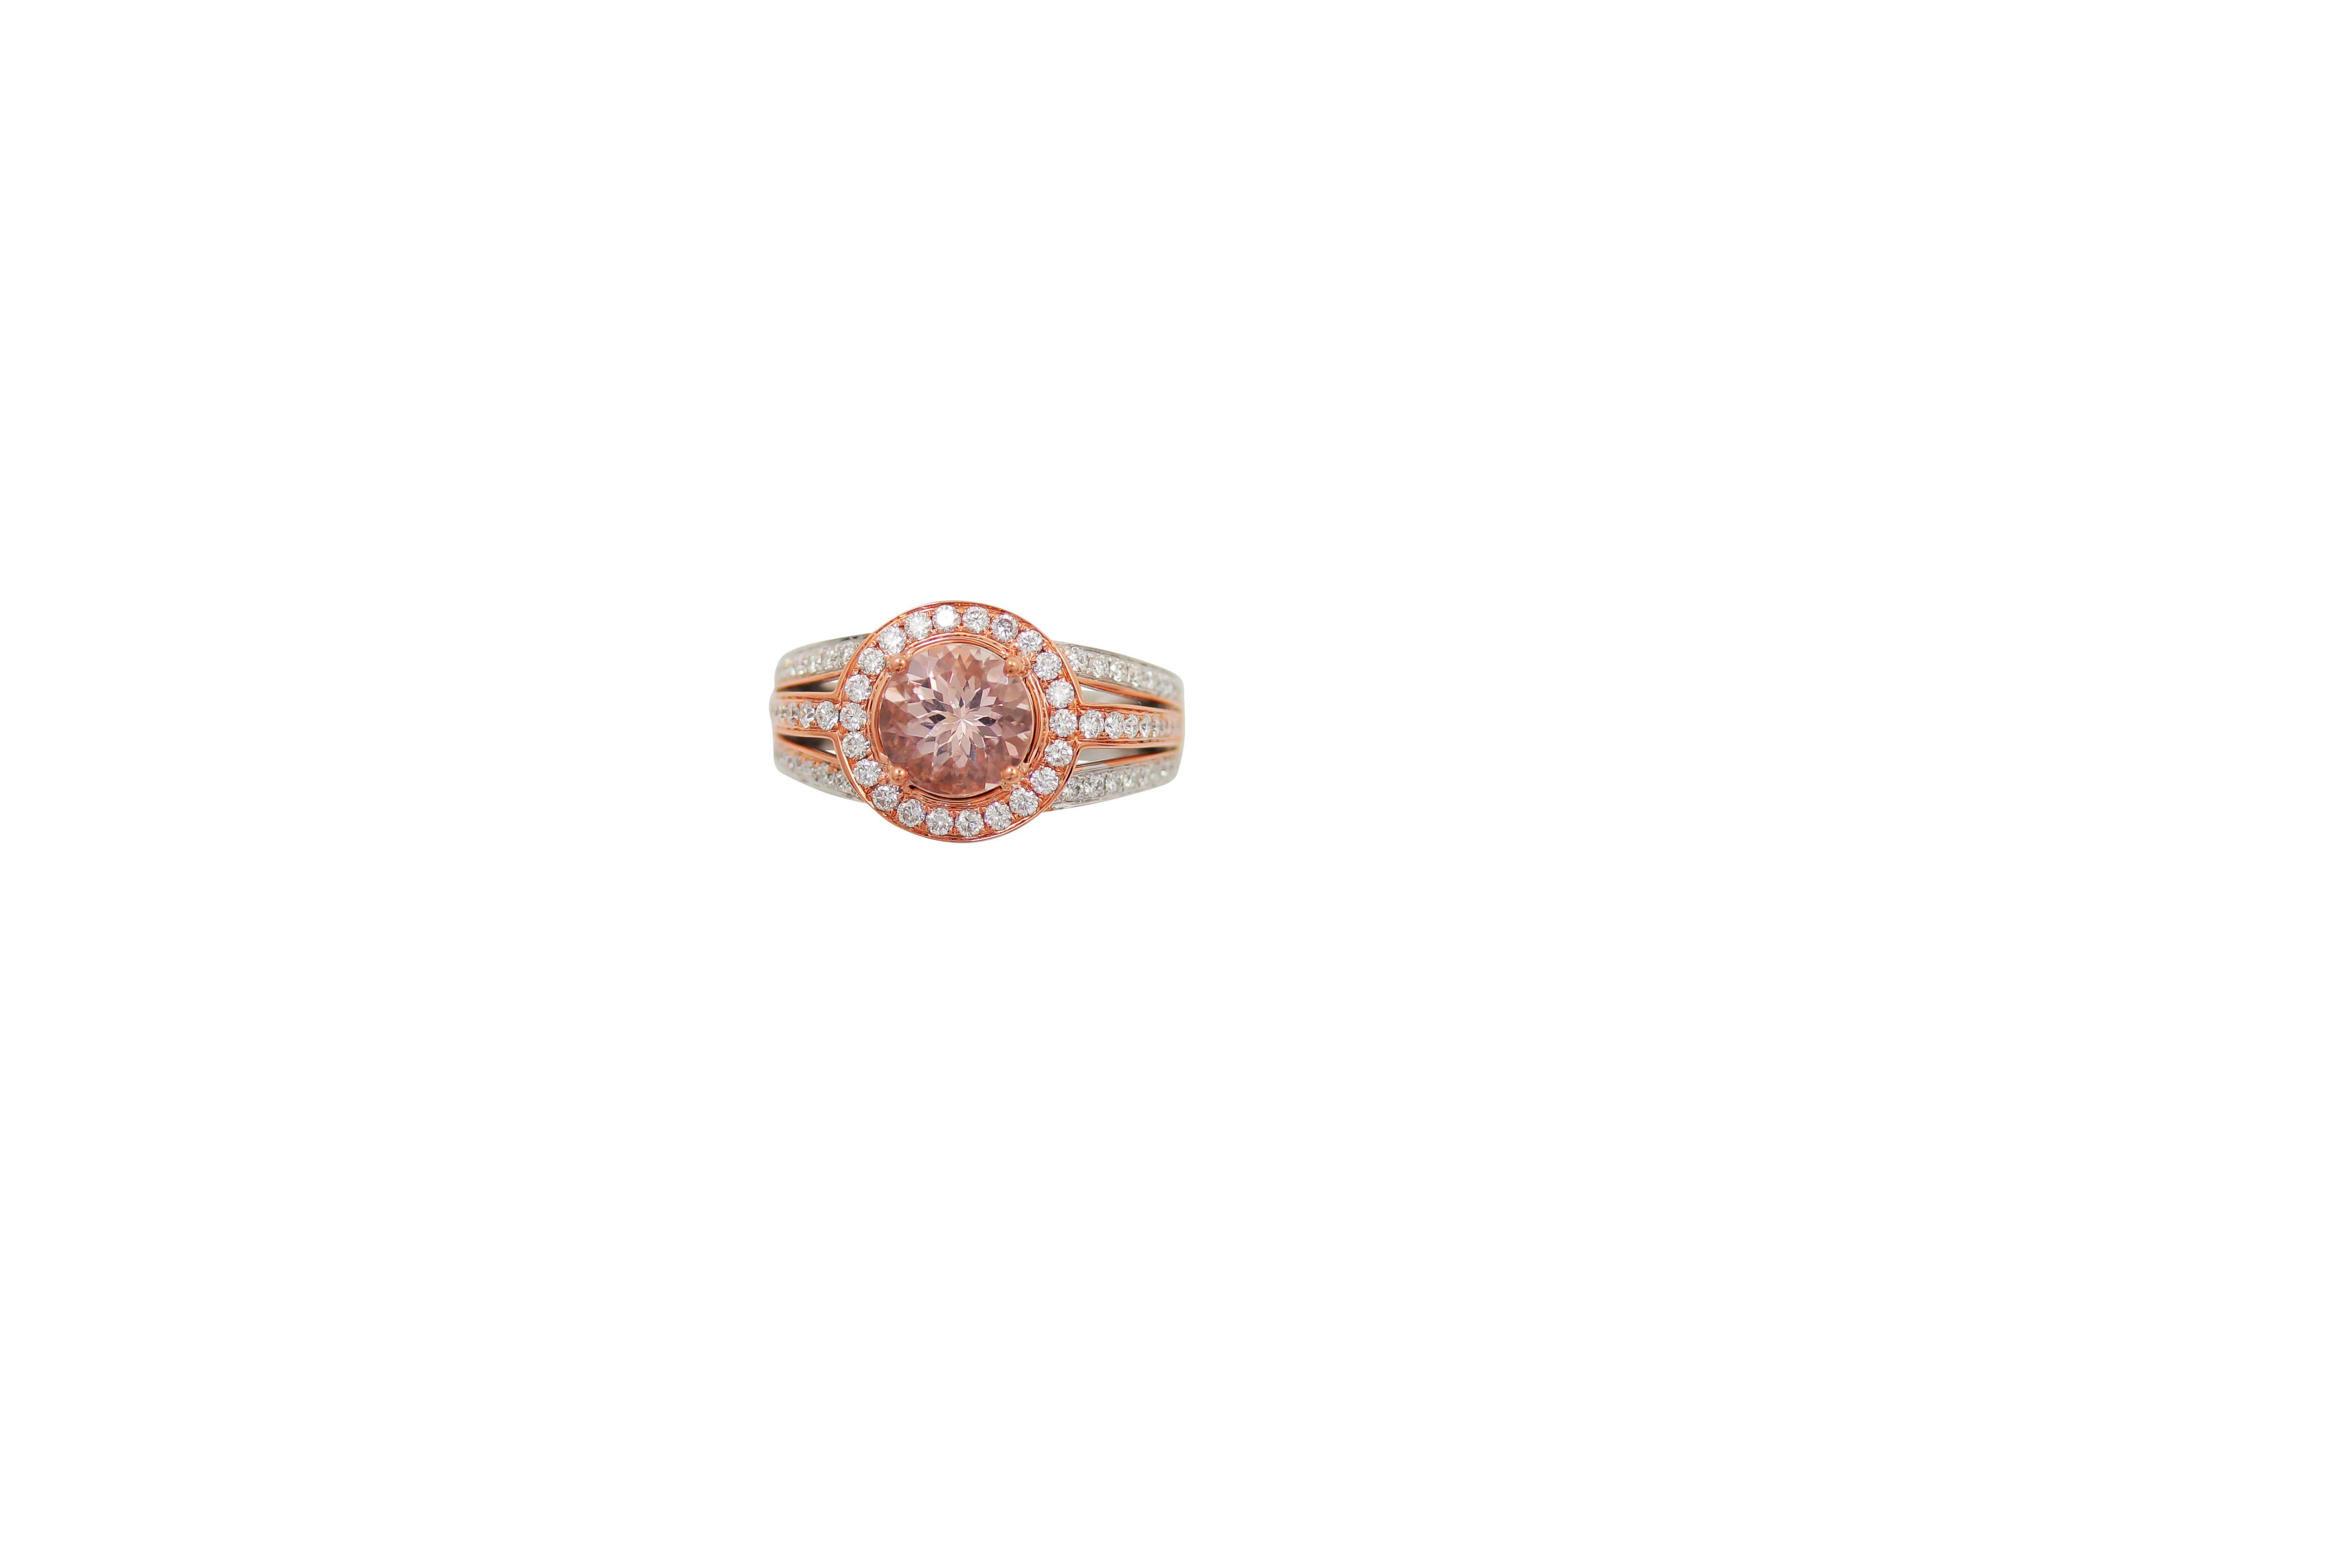 Frederic Sage 1.57 Carat Morganite and Diamond Pink/White Gold Ring For Sale 3